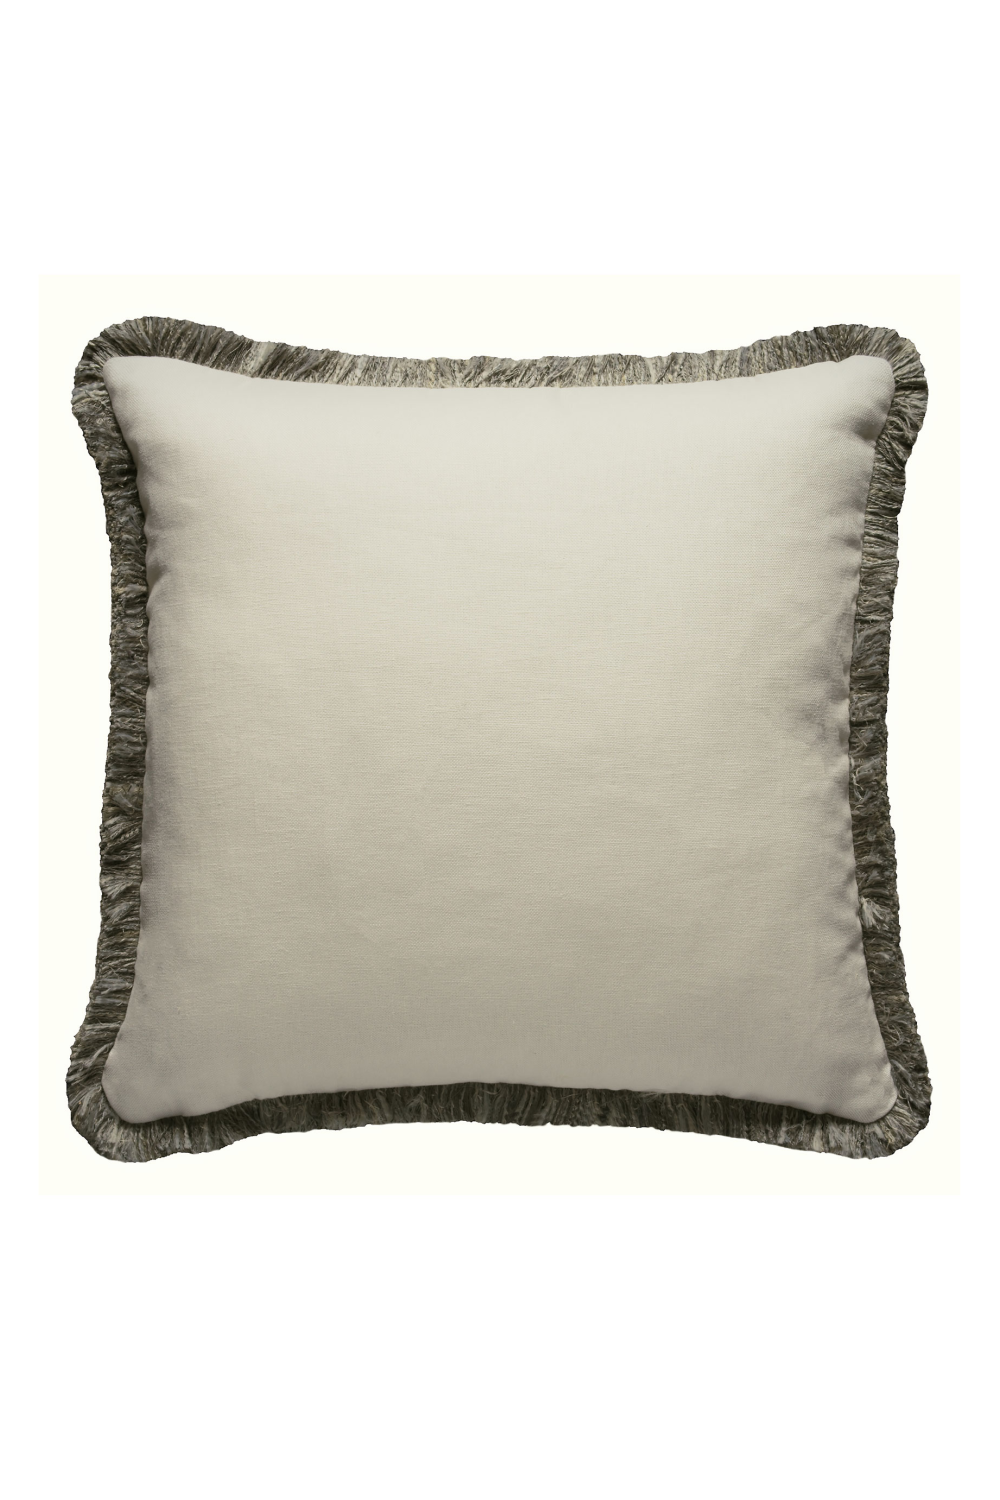 White Linen Cushion with Silvery Gray Fringe | Andrew Martin Beagle